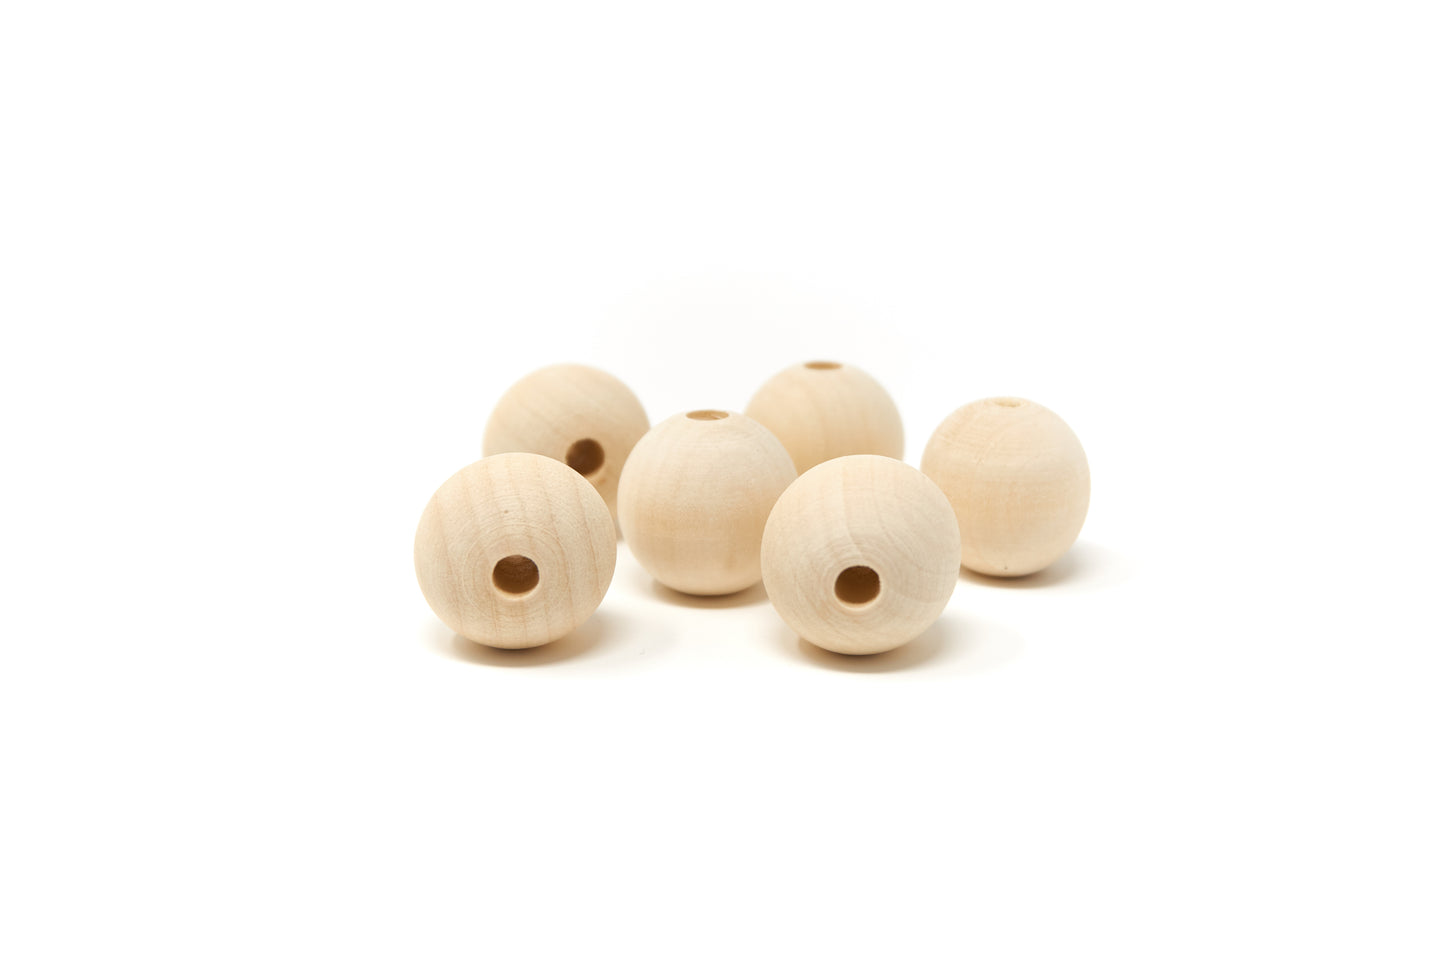 Natural Round Wood Beads 25mm 10 pieces - Cameos Art Shop